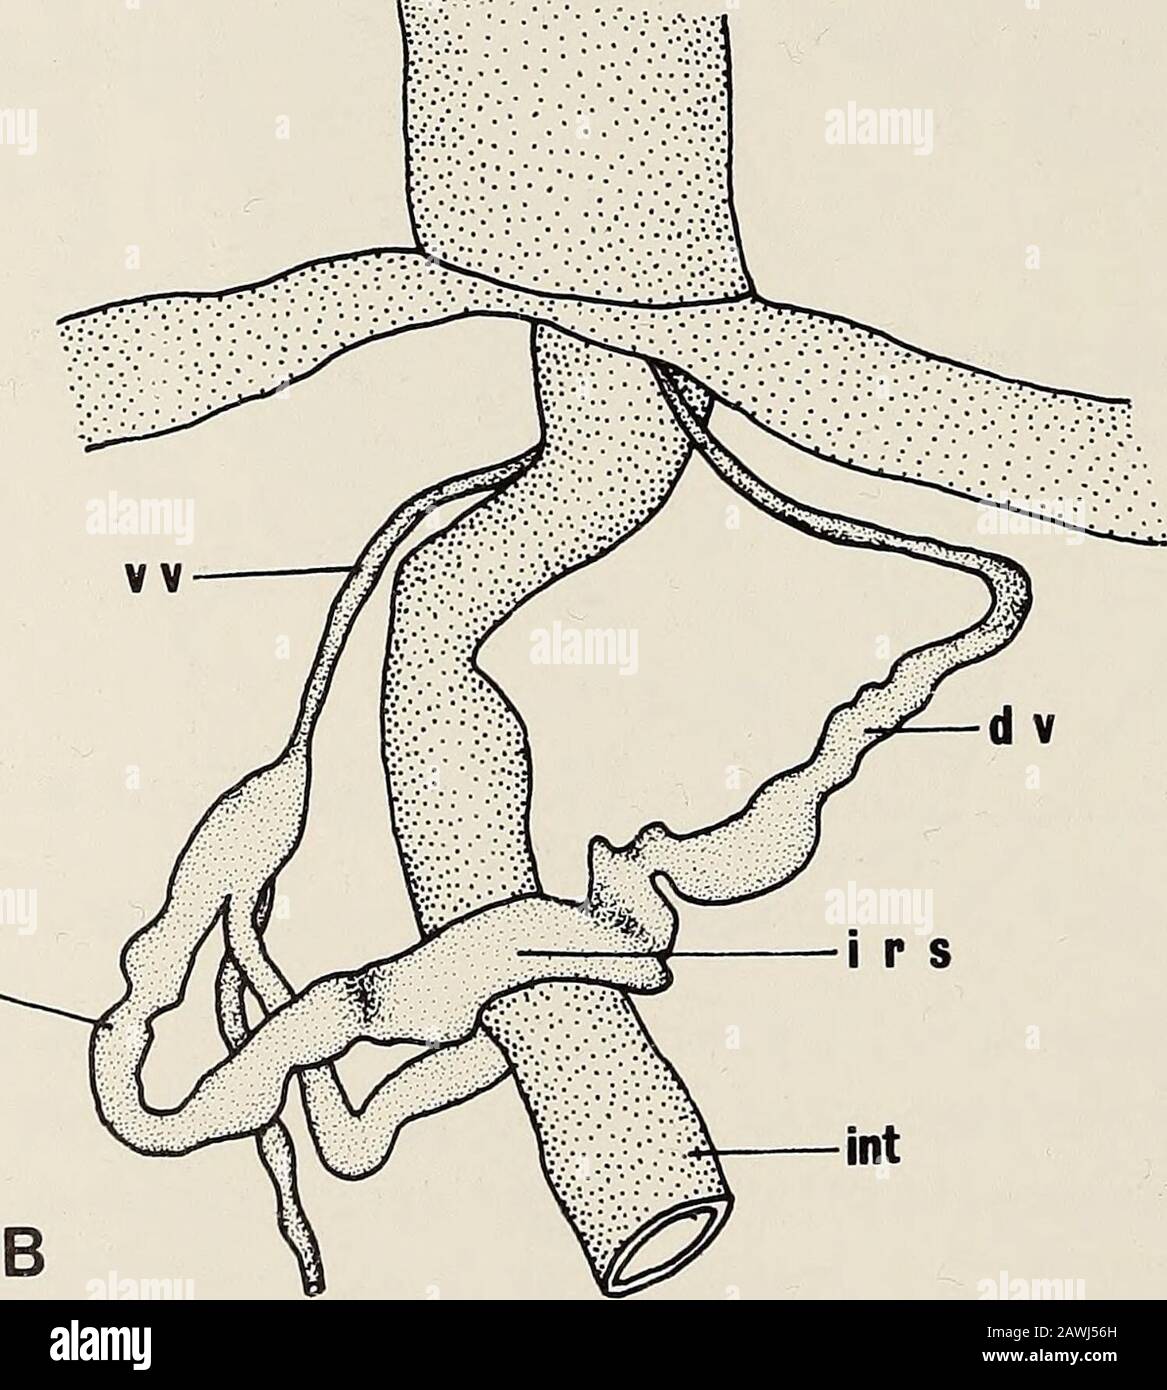 Annals of the South African Museum = Annale van die Suid-Afrikaanse Museum . n i v. 2 mm Fig. 19. Ochetostoma palense. Anterior part of the trunk cavity.A. Gonoducts. B. Blood vessels. ECHIURA FROM SOUTHERN AFRICA 65 Blood system. Intestinal ring sinus is an incomplete vascular ring at end offoregut (Fig. 19B). Paired neuro-intestinal vessels unite before opening intoventral vessel. Dorsal vessel prominent, arising from ring sinus and enteringproboscis. Remarks Ochetostoma palense (Ikeda, 1924) is based on a single specimen from PalauIslands, Japan. The holotype is small, about 22 mm in its en Stock Photo